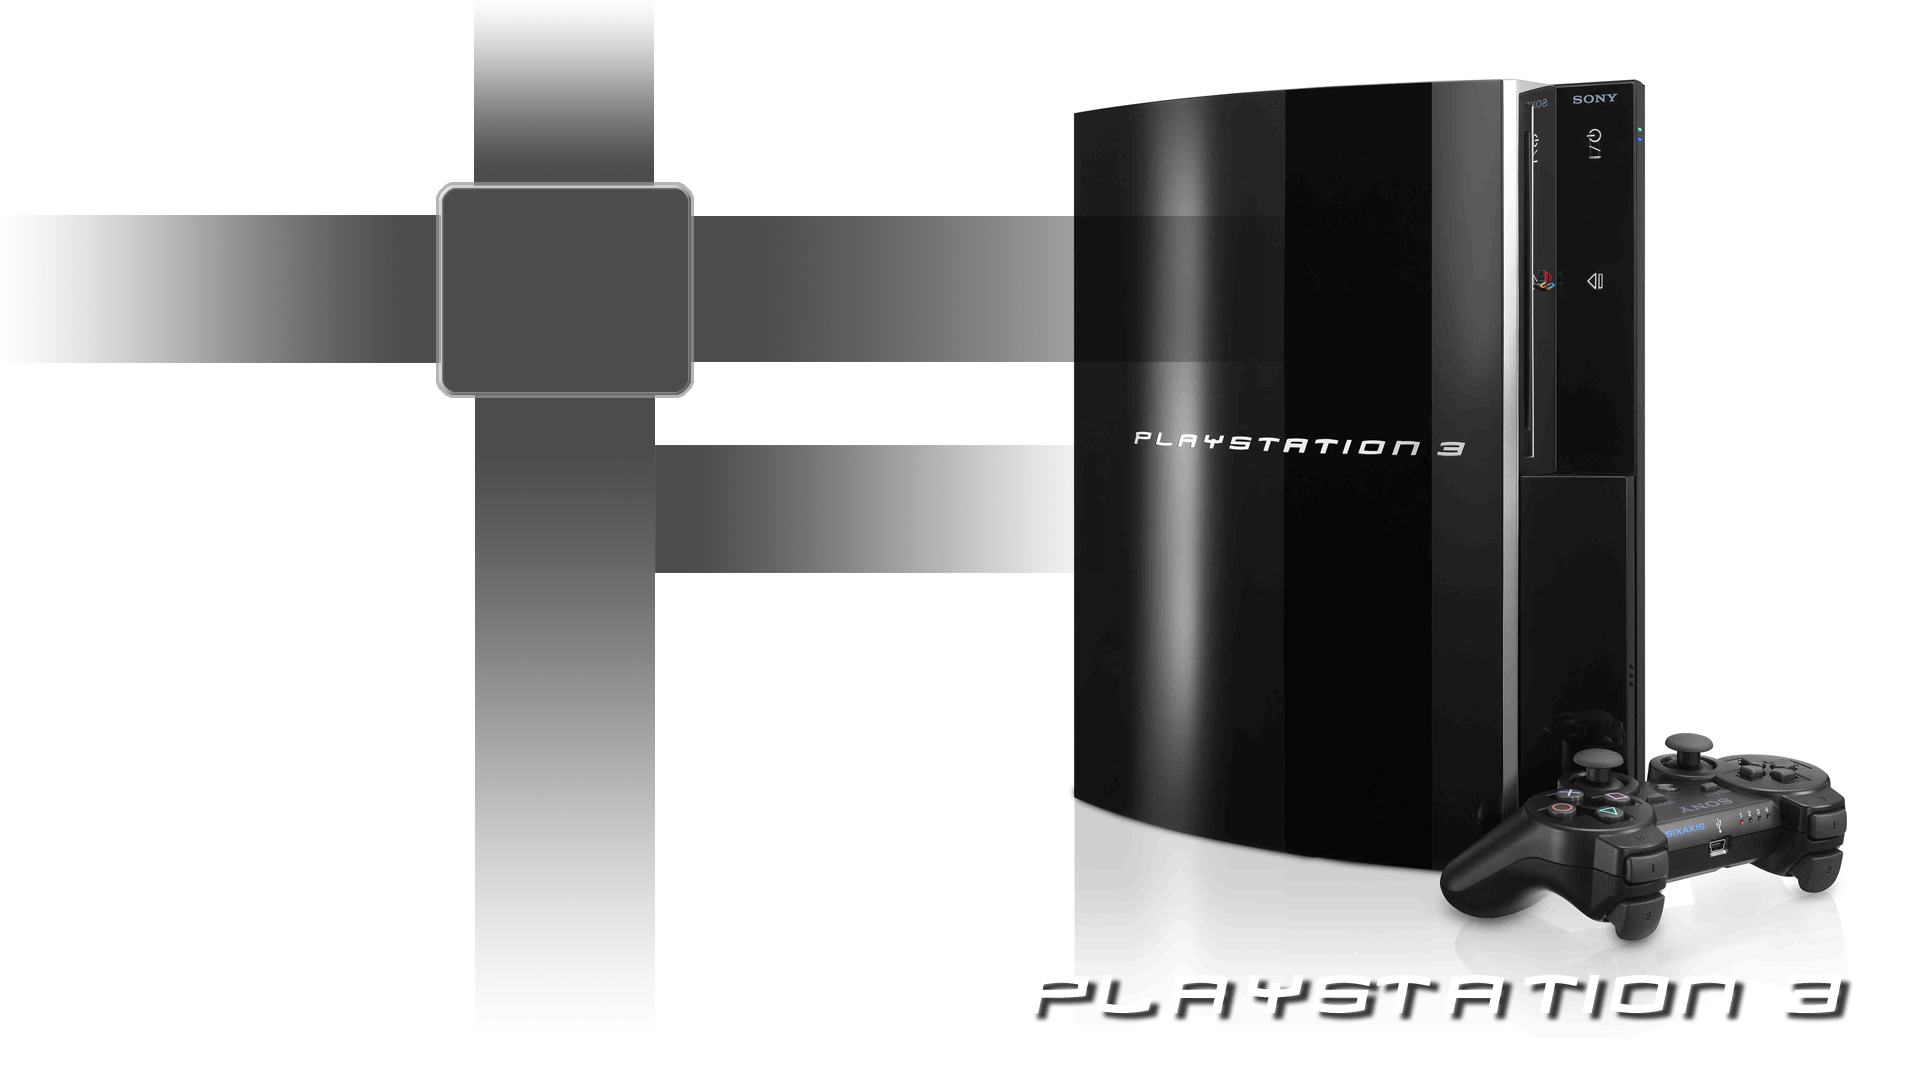 File Name 871456 871456 Playstation 3 Wallpapers